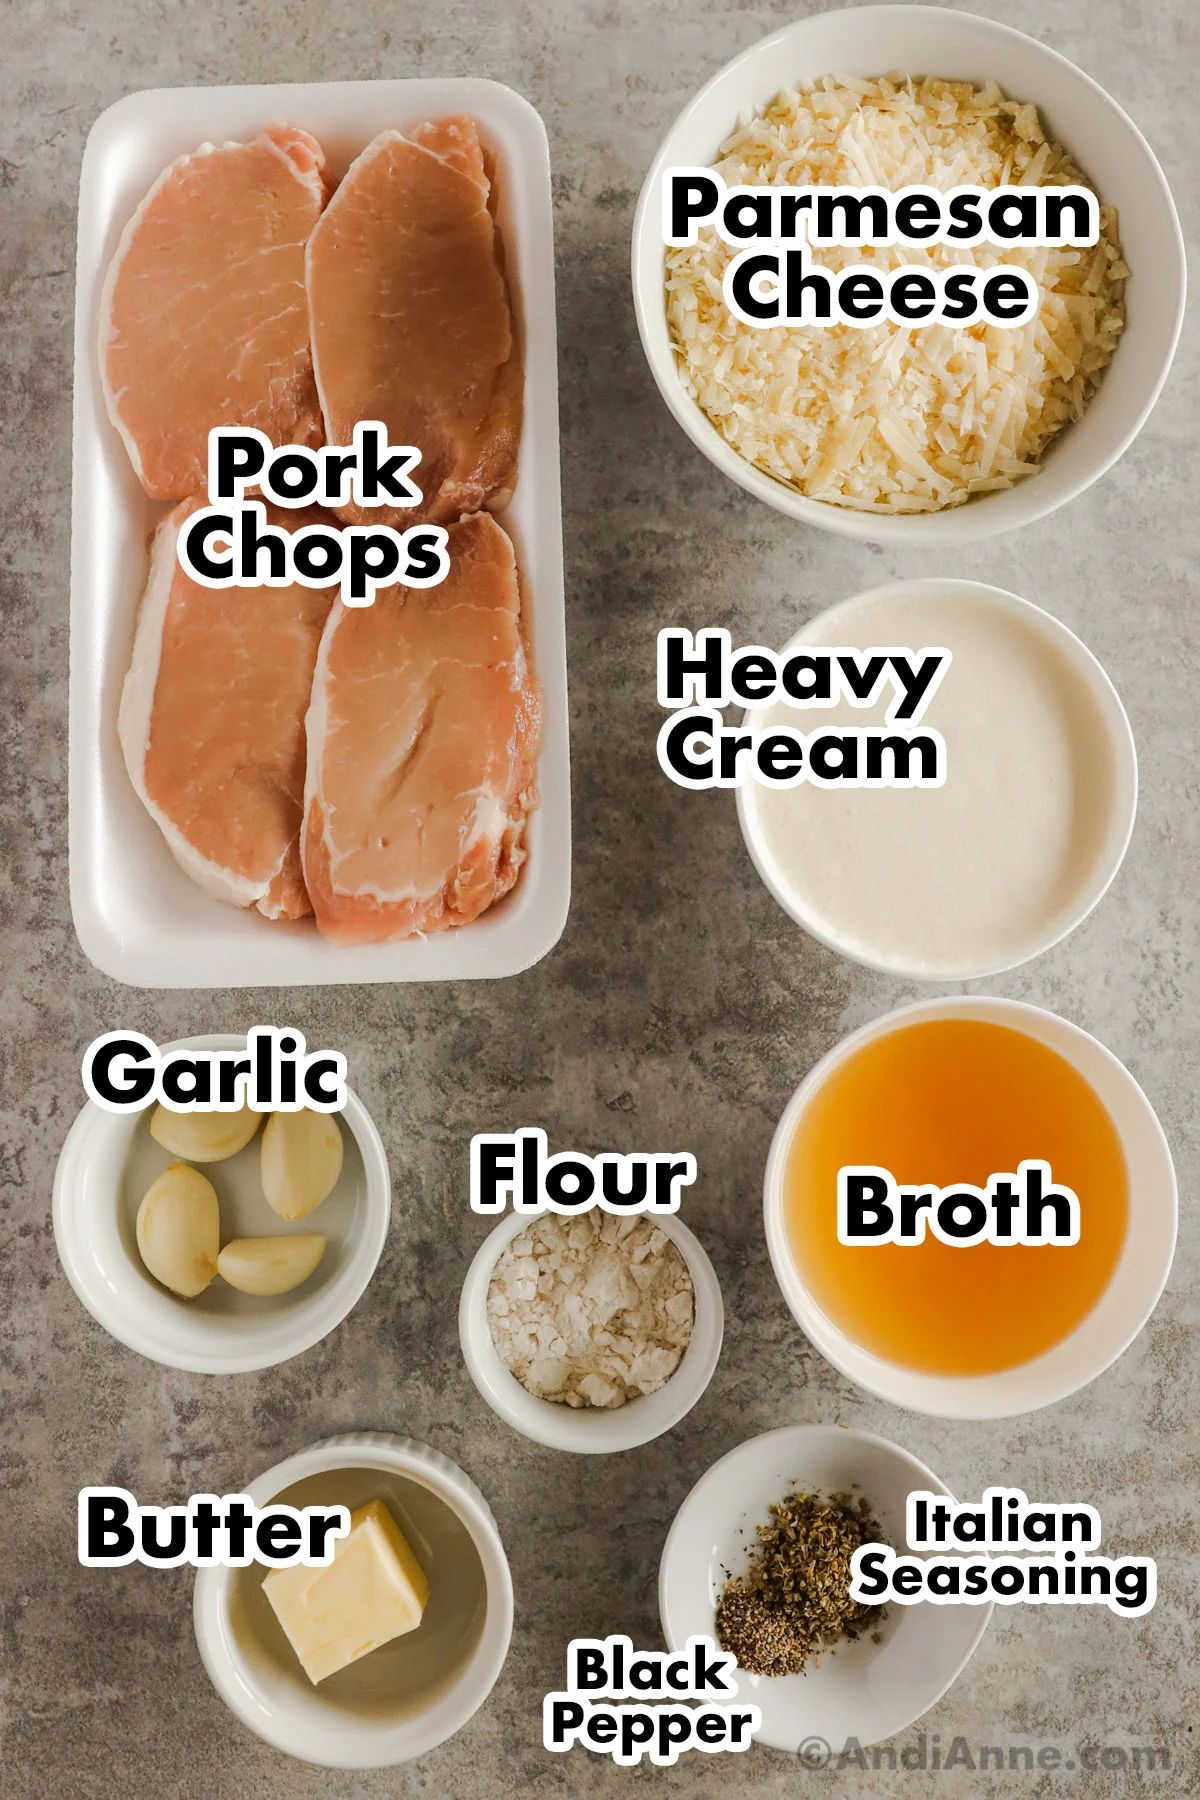 Recipe ingredients in containers including pork chops, grated parmesan, cream, garlic, flour, broth, butter, and spices.